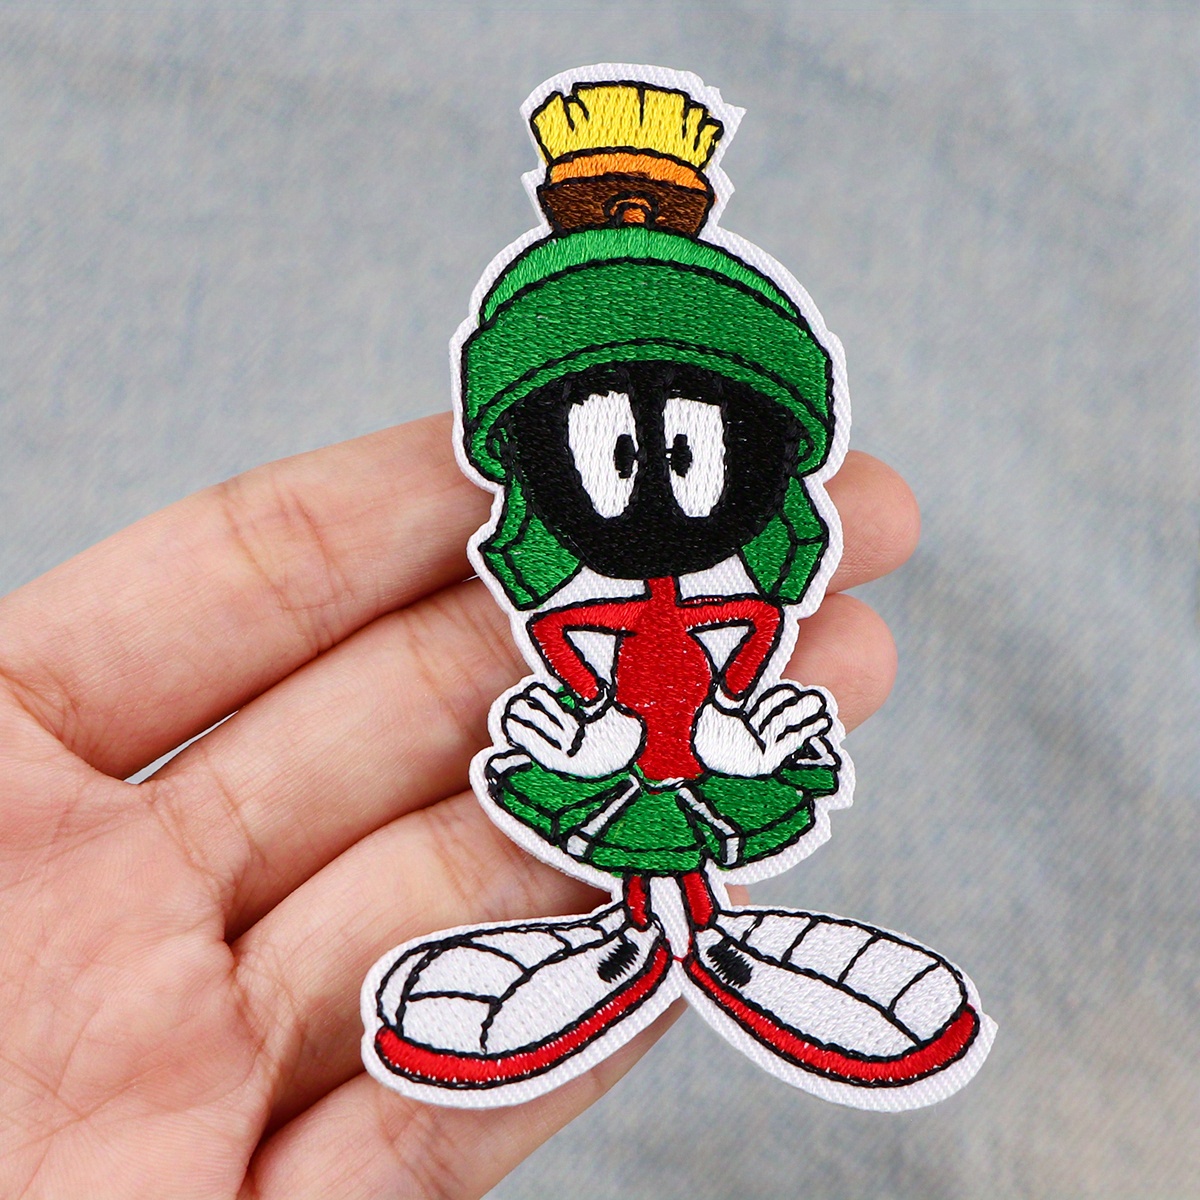 1pc Cartoon Embroidery Patch Iron On Patches For Clothing Anime Patches On  Clothes Animal Sew Ironing Sticker